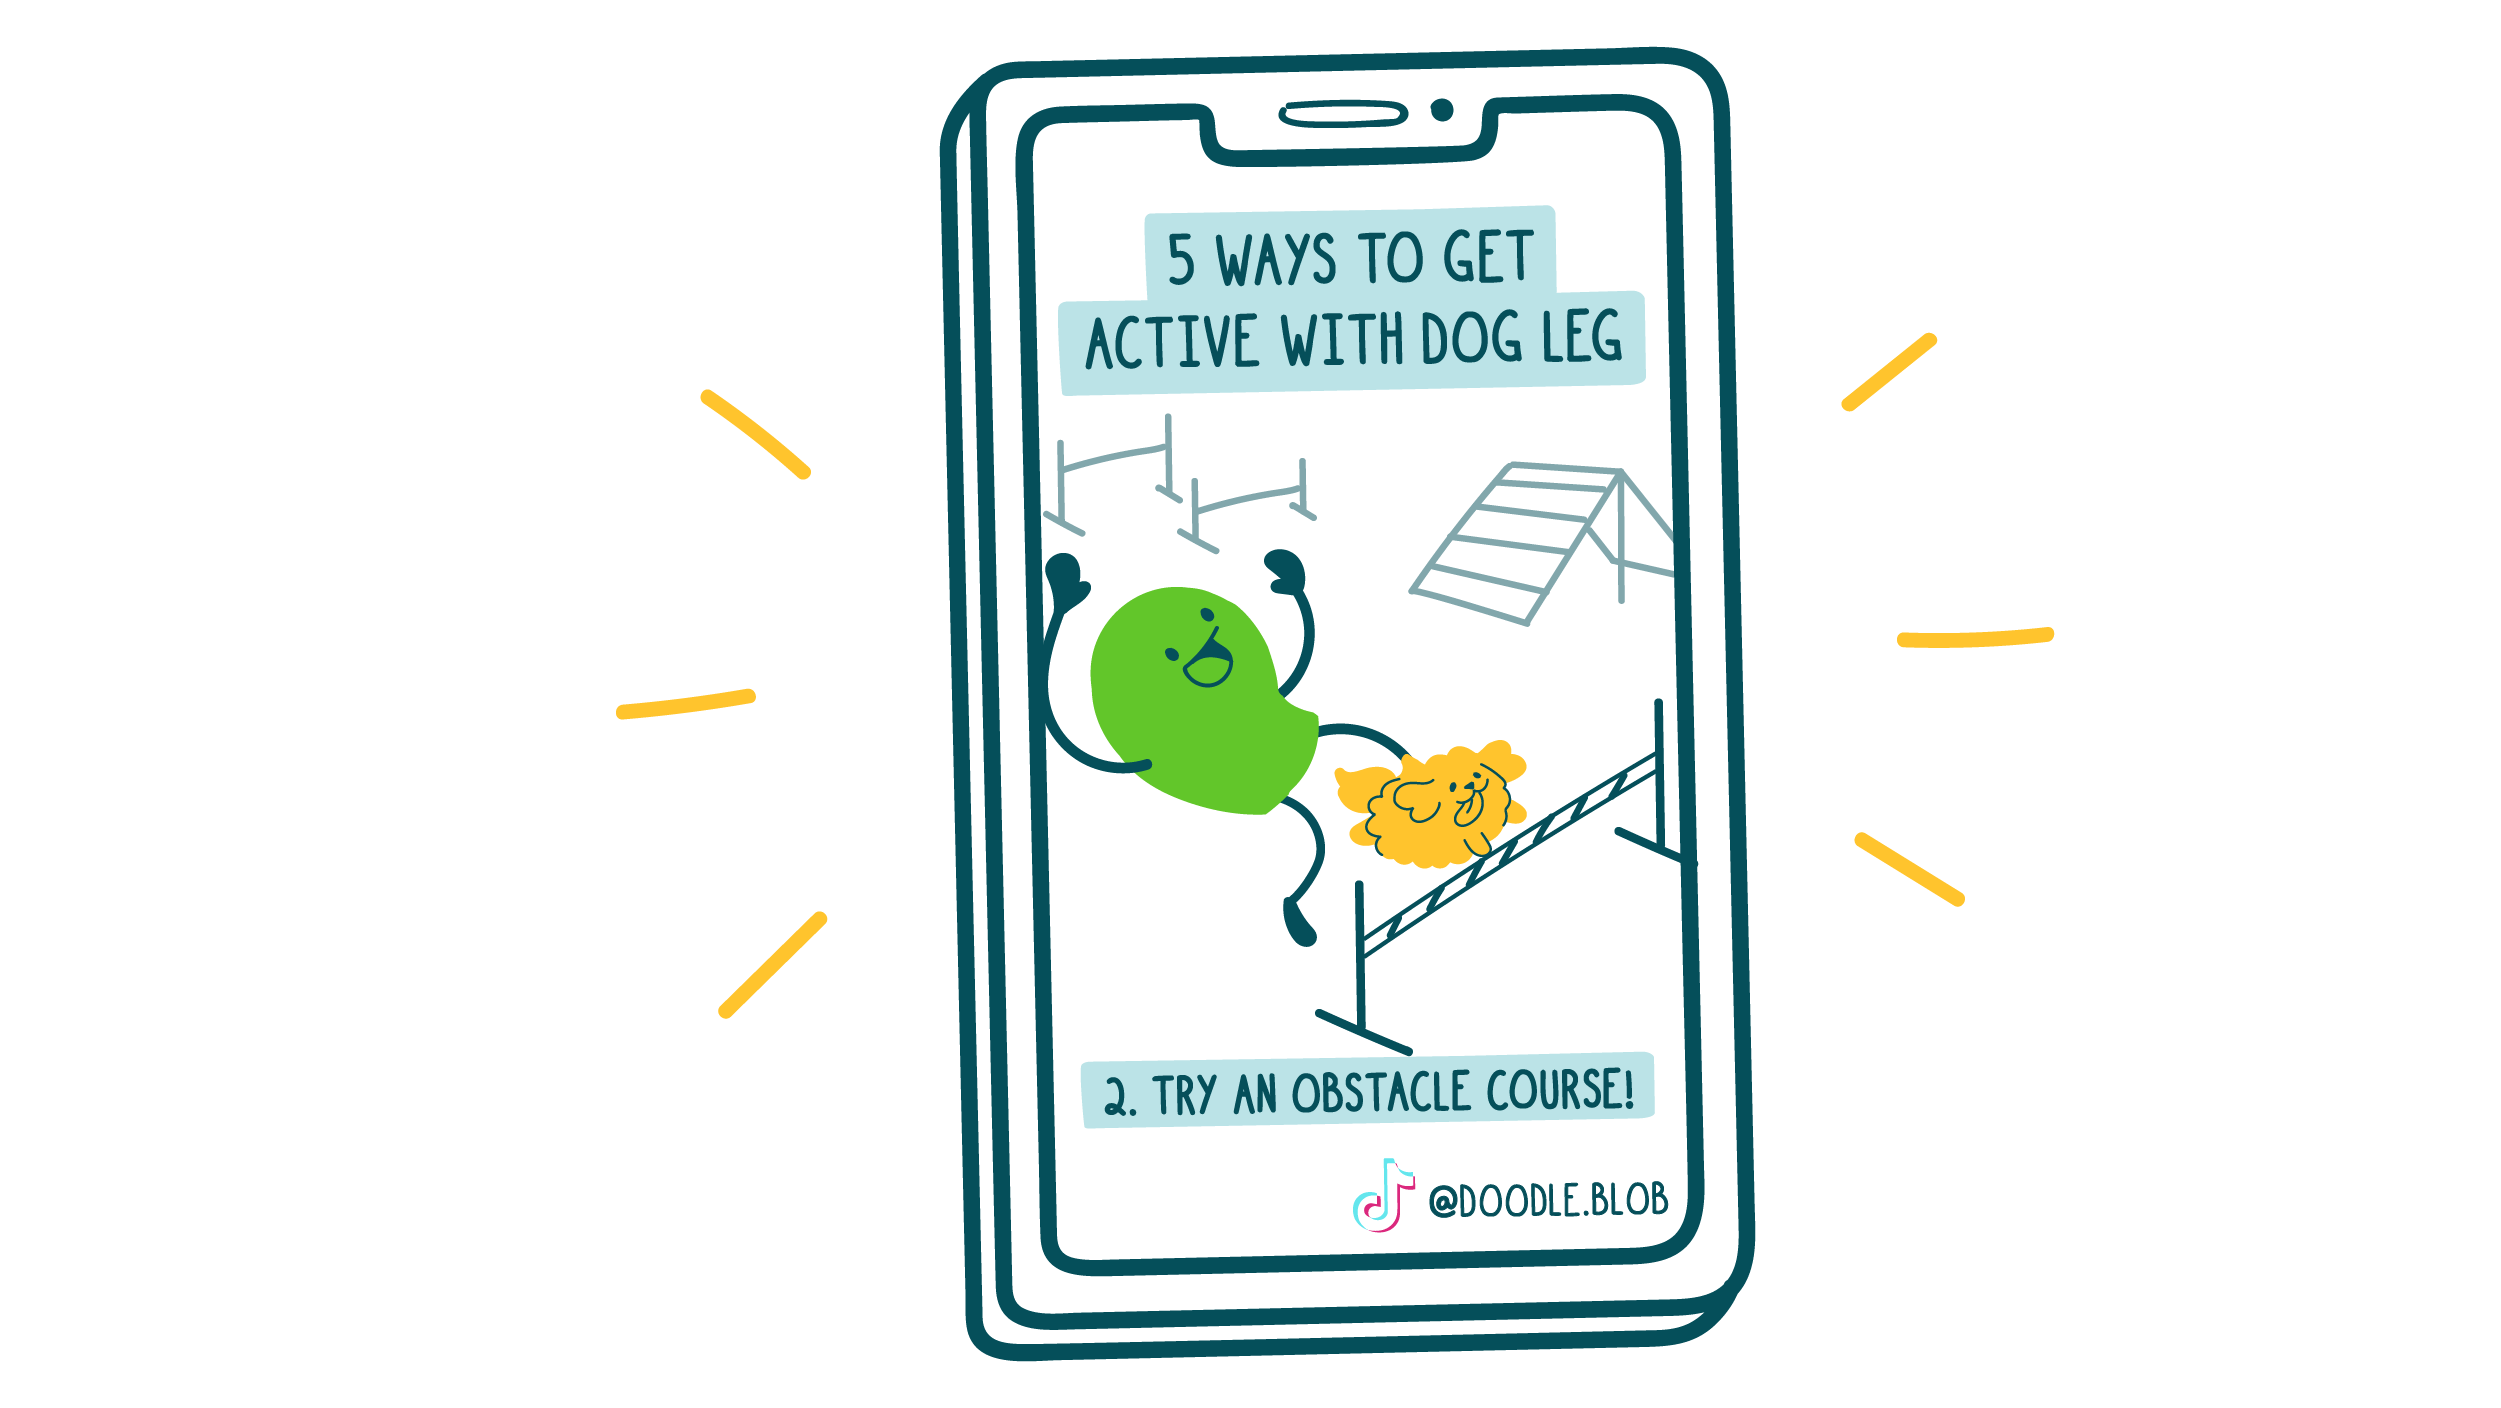 A doodle with dog leg stumbles through an obstacle course in a TikTok titled, "5 Ways to Get Active With Dog Leg." At the bottom of the screen is text that reads, “2. Try an obstacle course!”